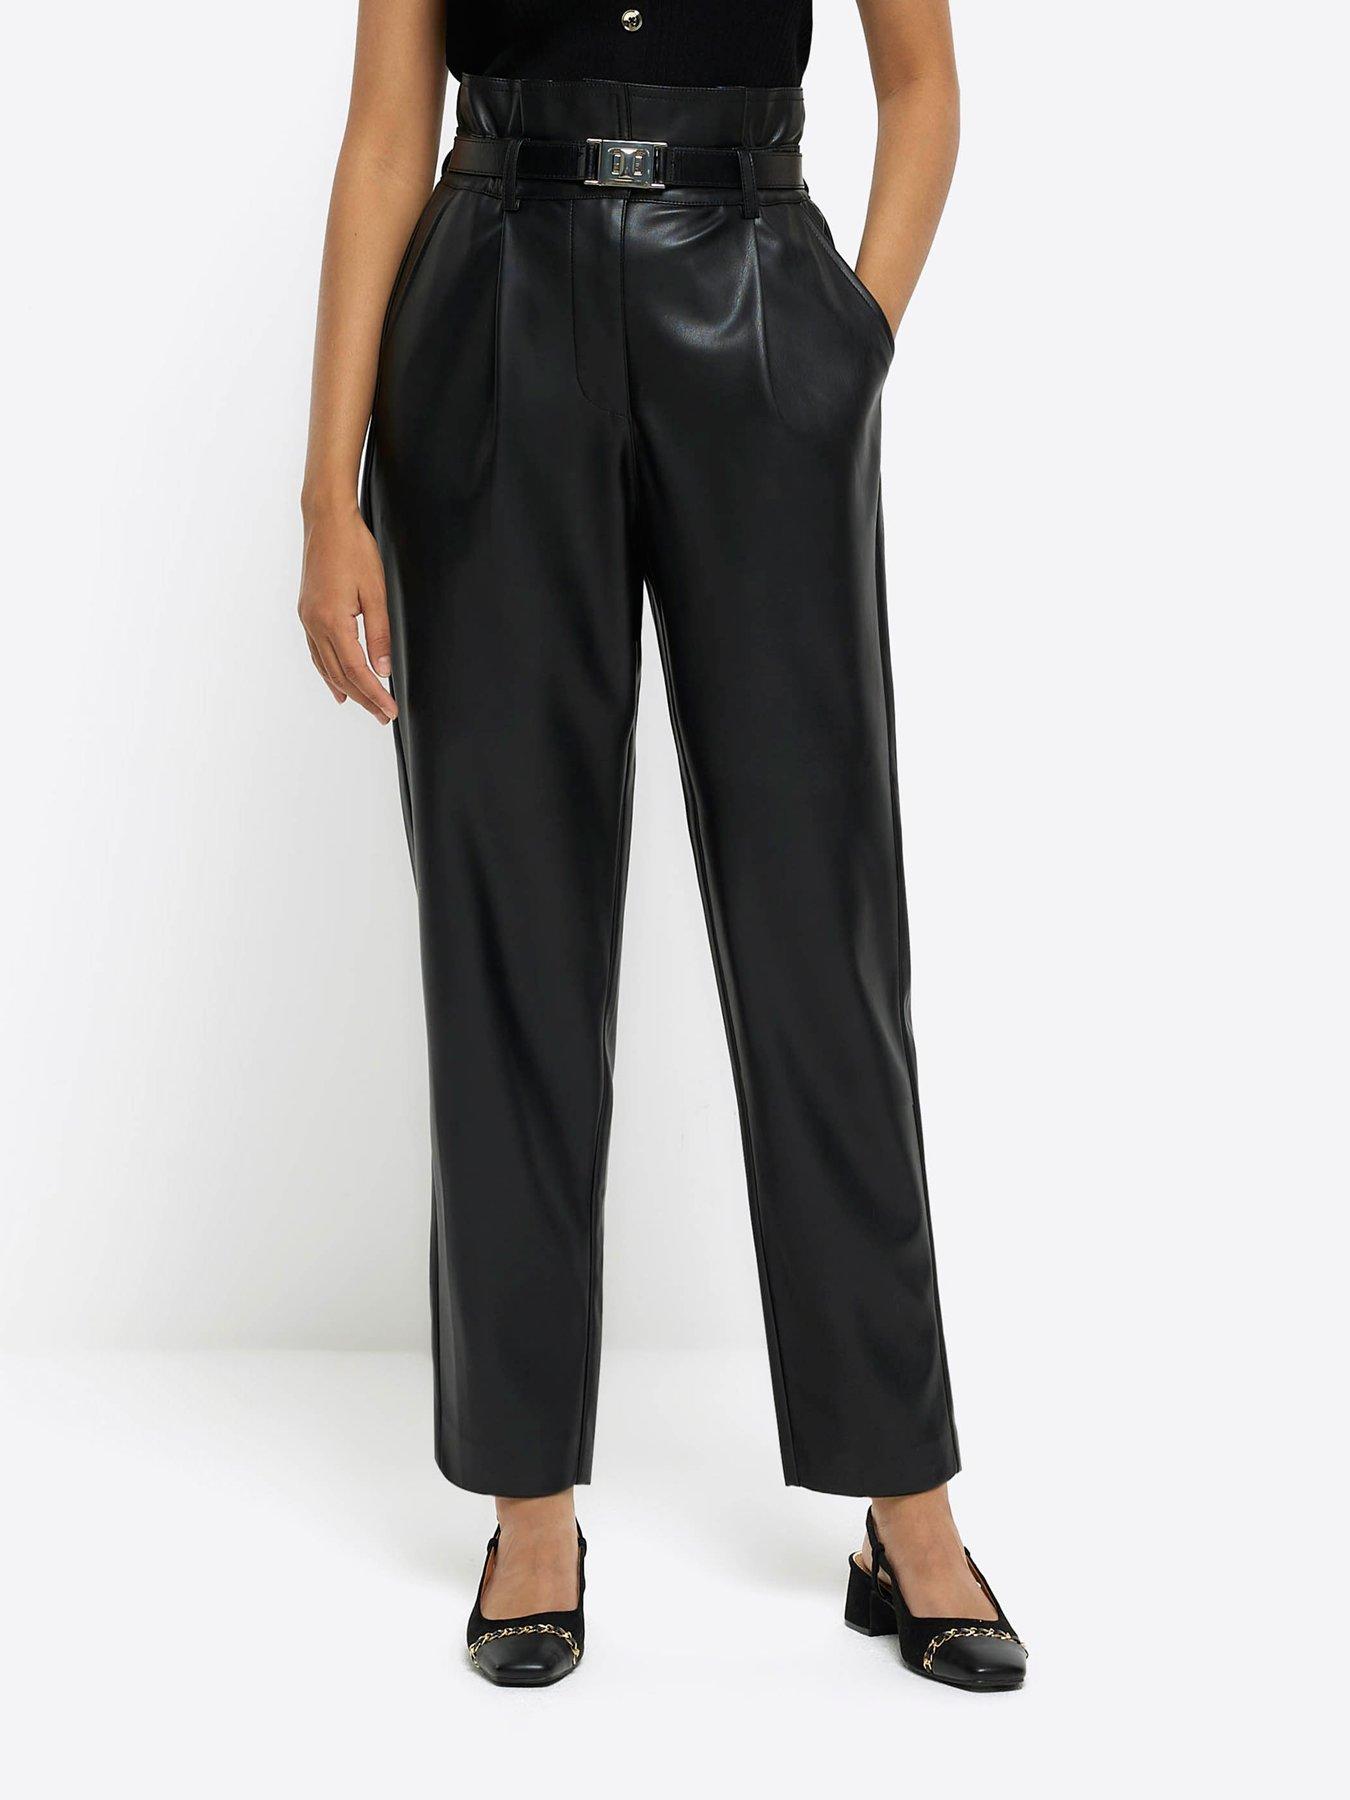 River Island faux leather straight leg trouser in black | ASOS | Straight  leg pants, Straight leg trousers, Leggings are not pants